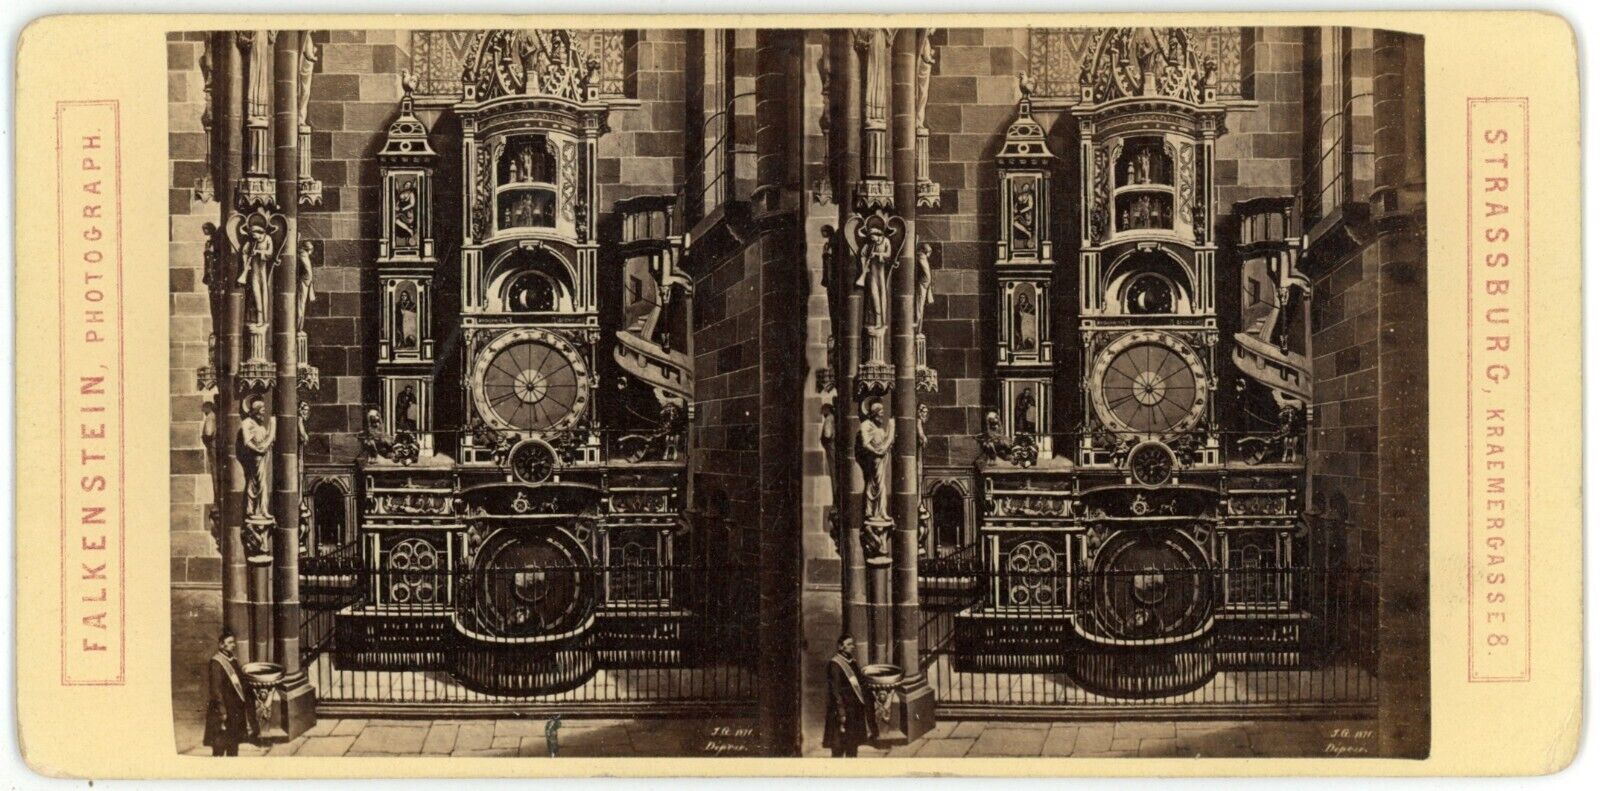 c1900's RARE Real Photo Stereoview Astronomical Clock in Strassburg France